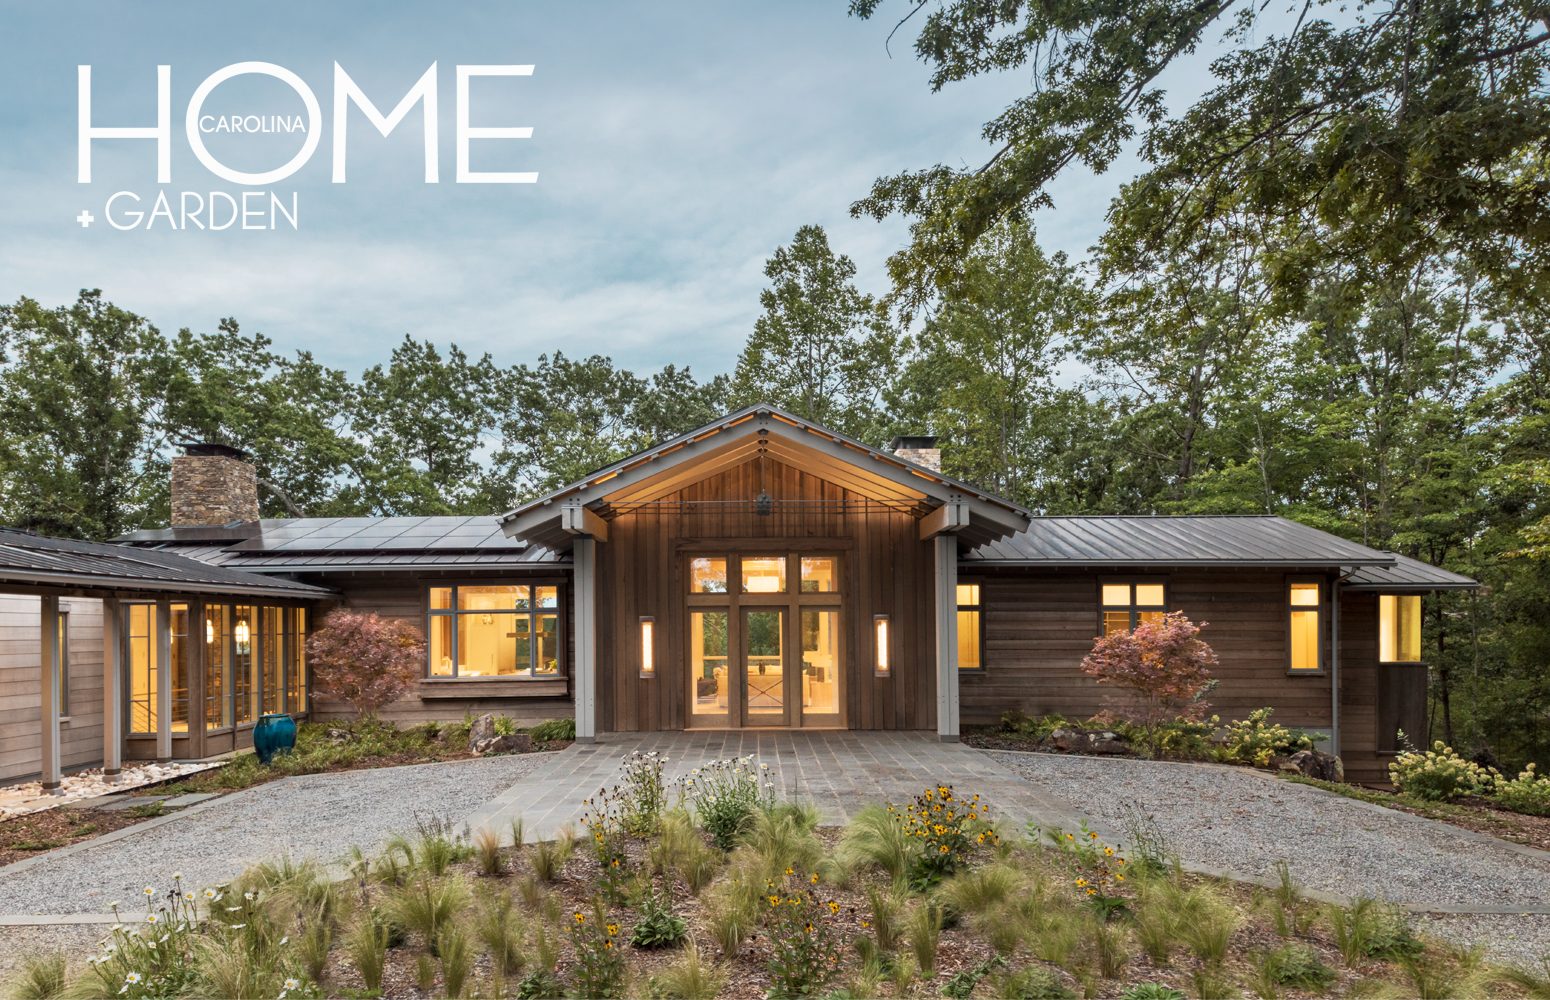 Mill Spring Residence Featured in Carolina Home + Garden